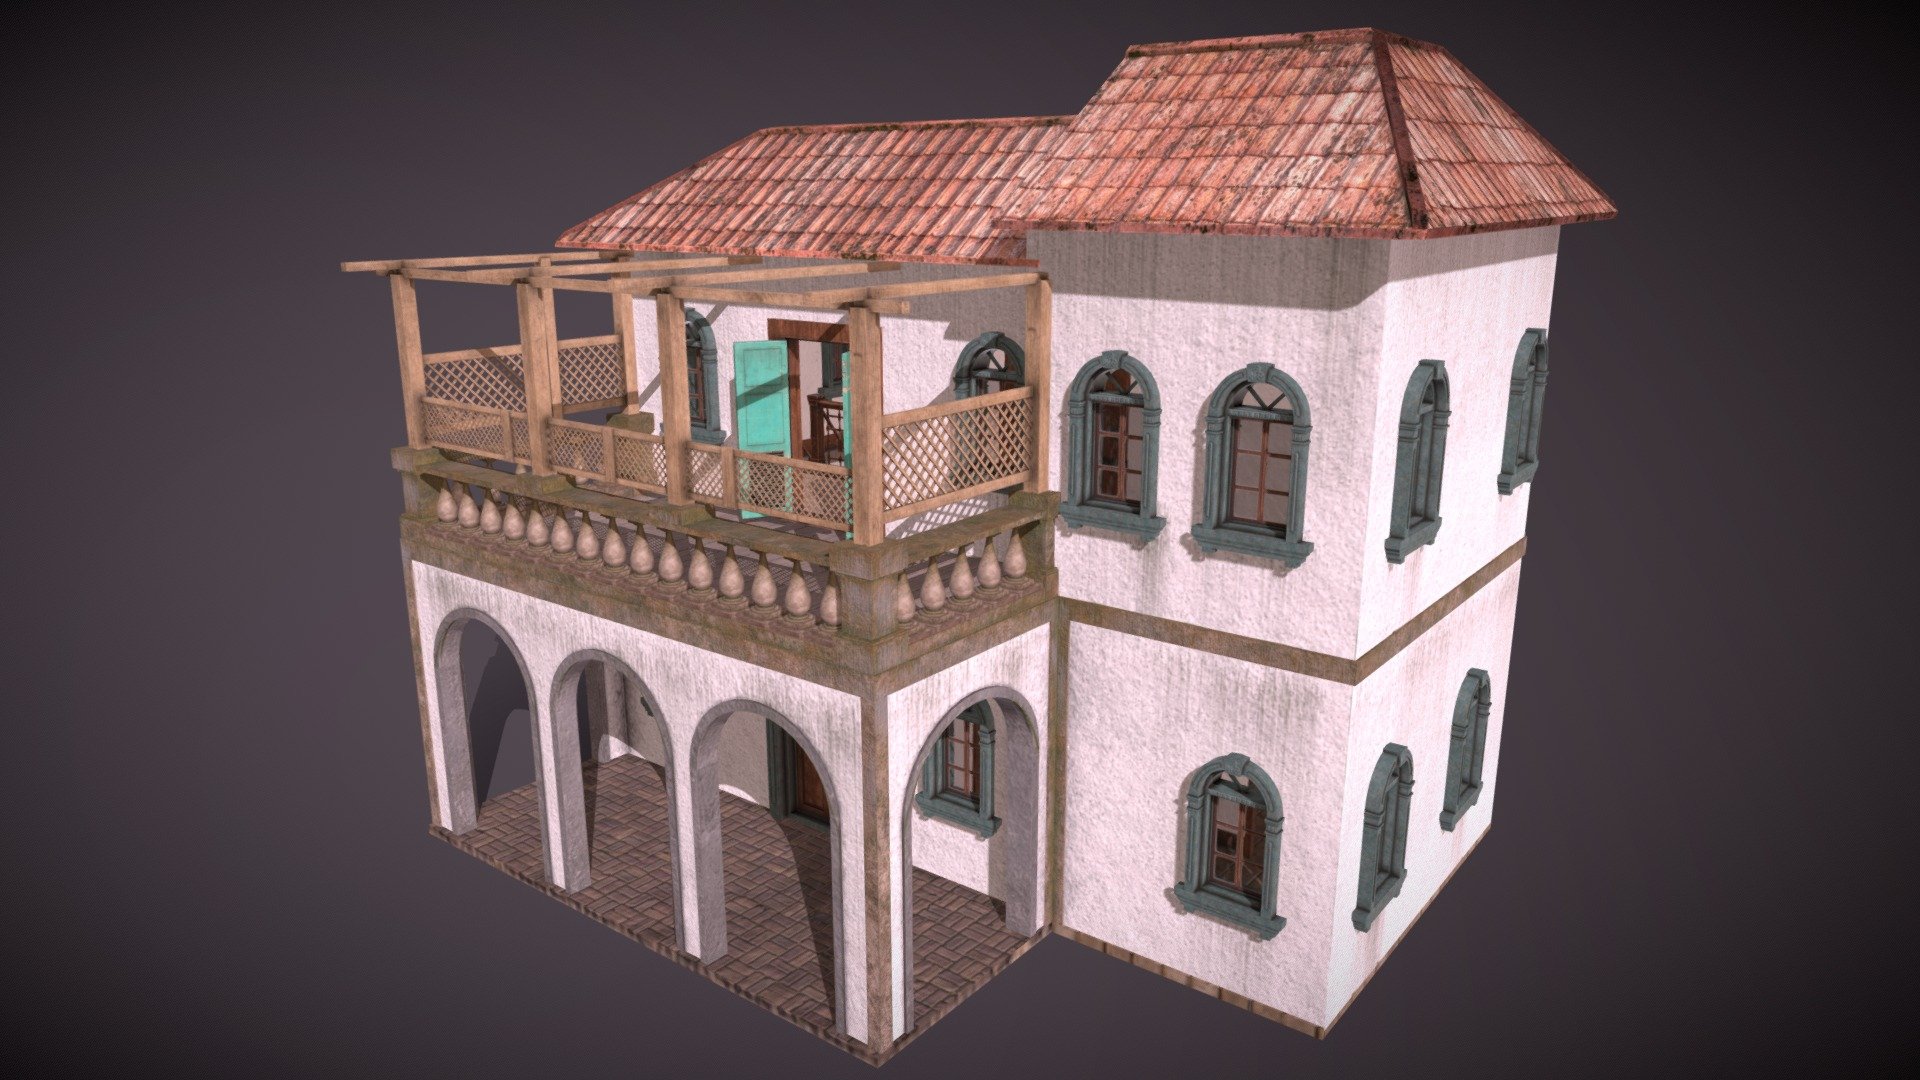 -Vintage Villa is modeled in  Blender version 2.79b.

-For texturing Substance Painter is used.

-Render engine used is Blender Cycles version 2.79b.

-The Model has 13 Meshes and 13 Materials.

-2k and 1k Material Textures in .PNG format included.

(On request 4k textures can also be made available)

-.Blend (Packed+Original), .fbx and .Obj Format avalable.

-According to blender statistics VintageVilla model has 

(Verts:60001 Faces:50960 Tris:99876) - The Vintage Villa - Buy Royalty Free 3D model by CG Buzz (@Tapan_S) 3d model